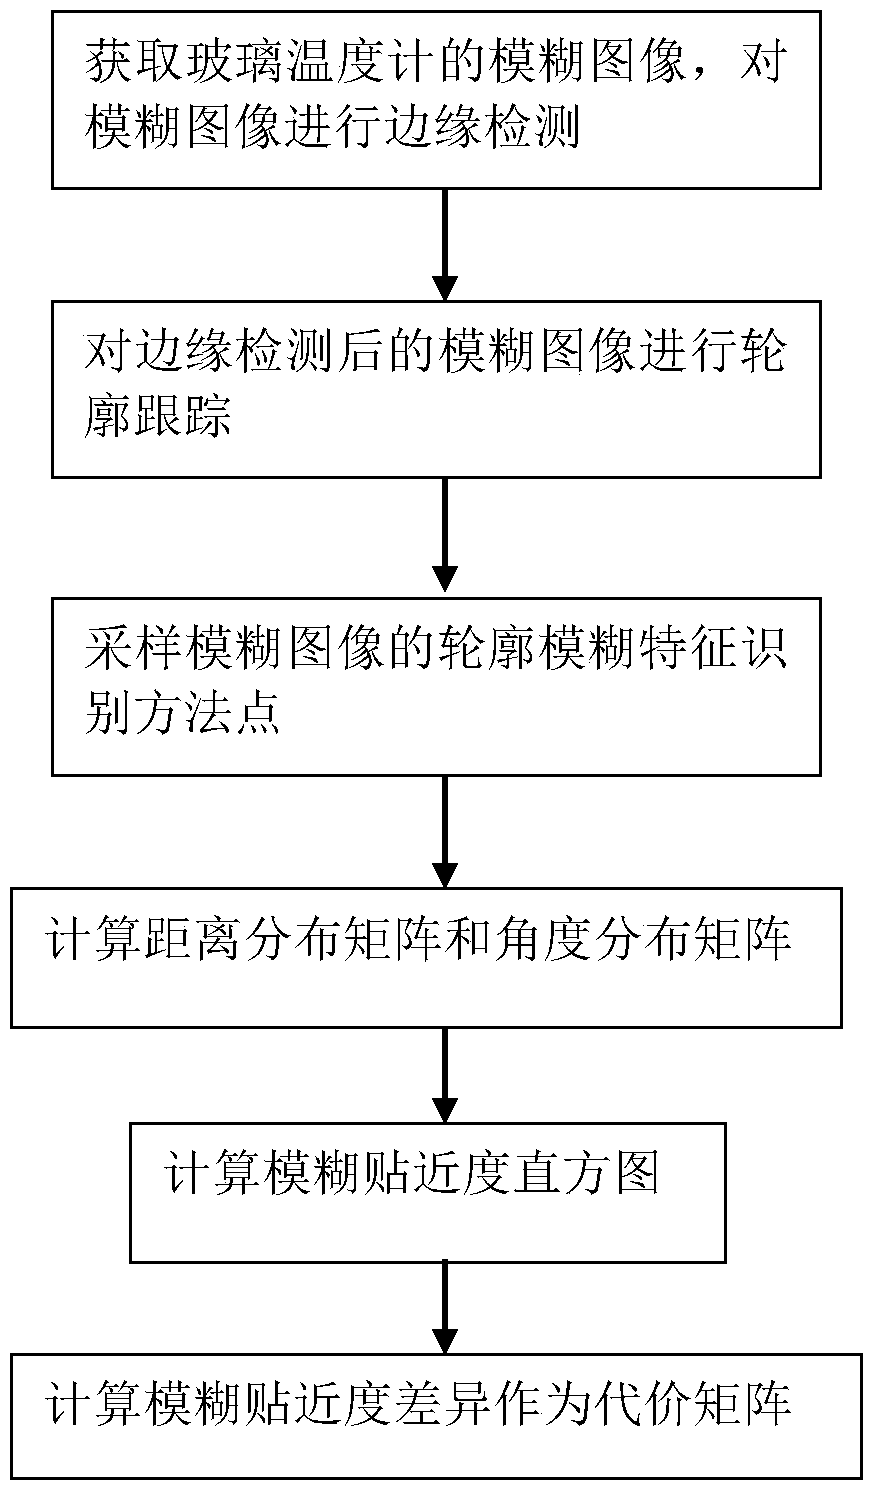 Recognition method for verification temperature character of glass thermometer